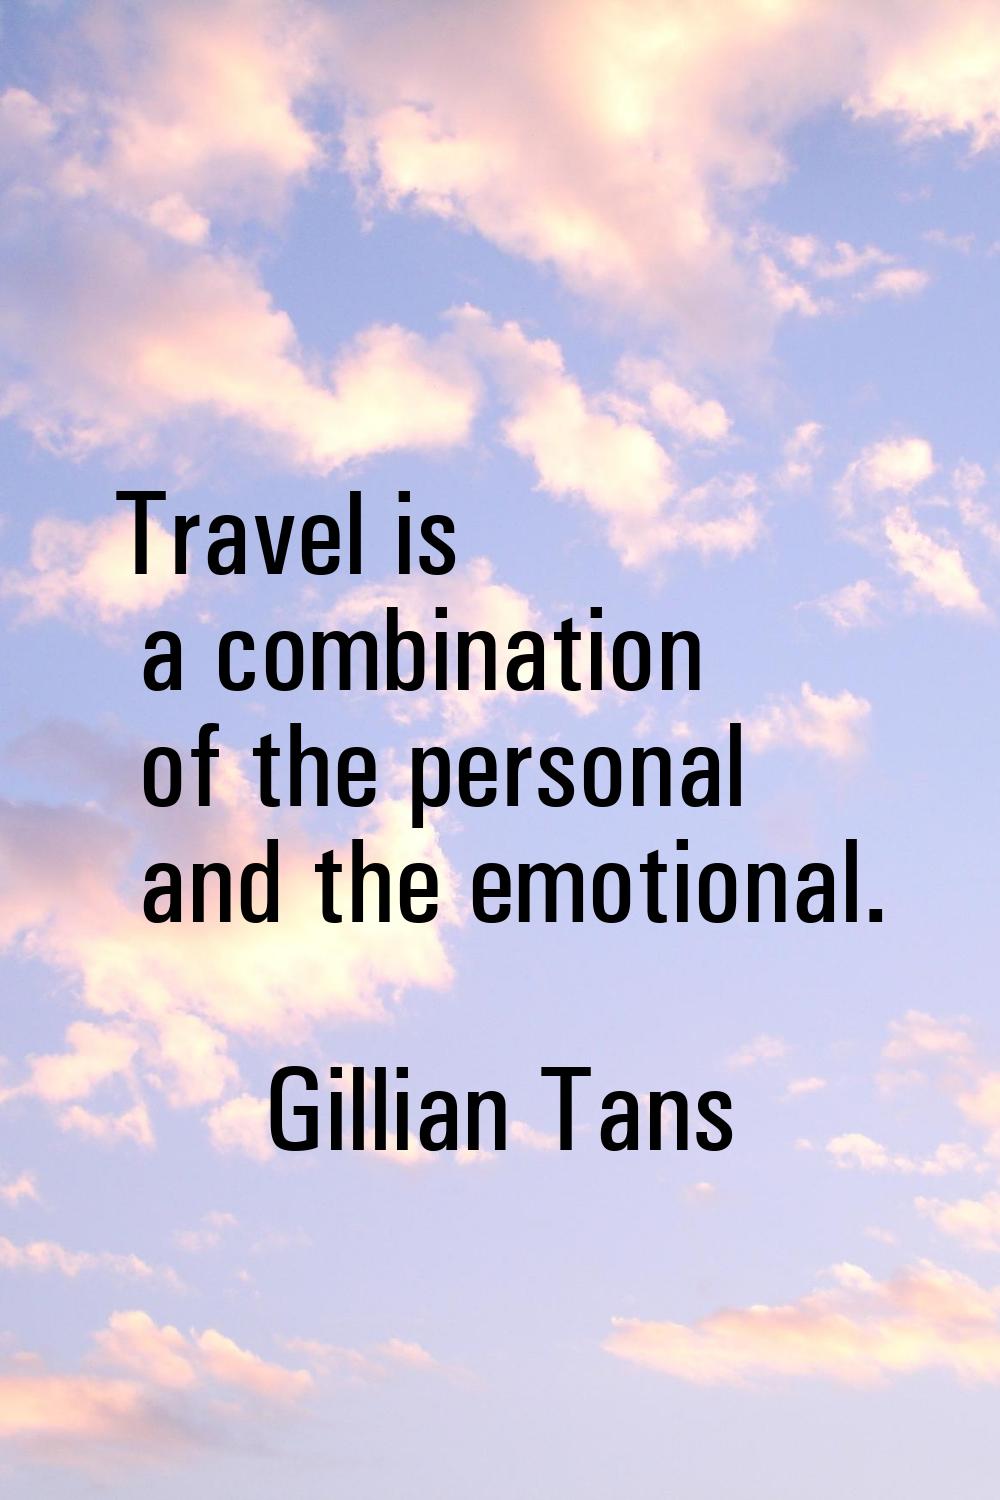 Travel is a combination of the personal and the emotional.